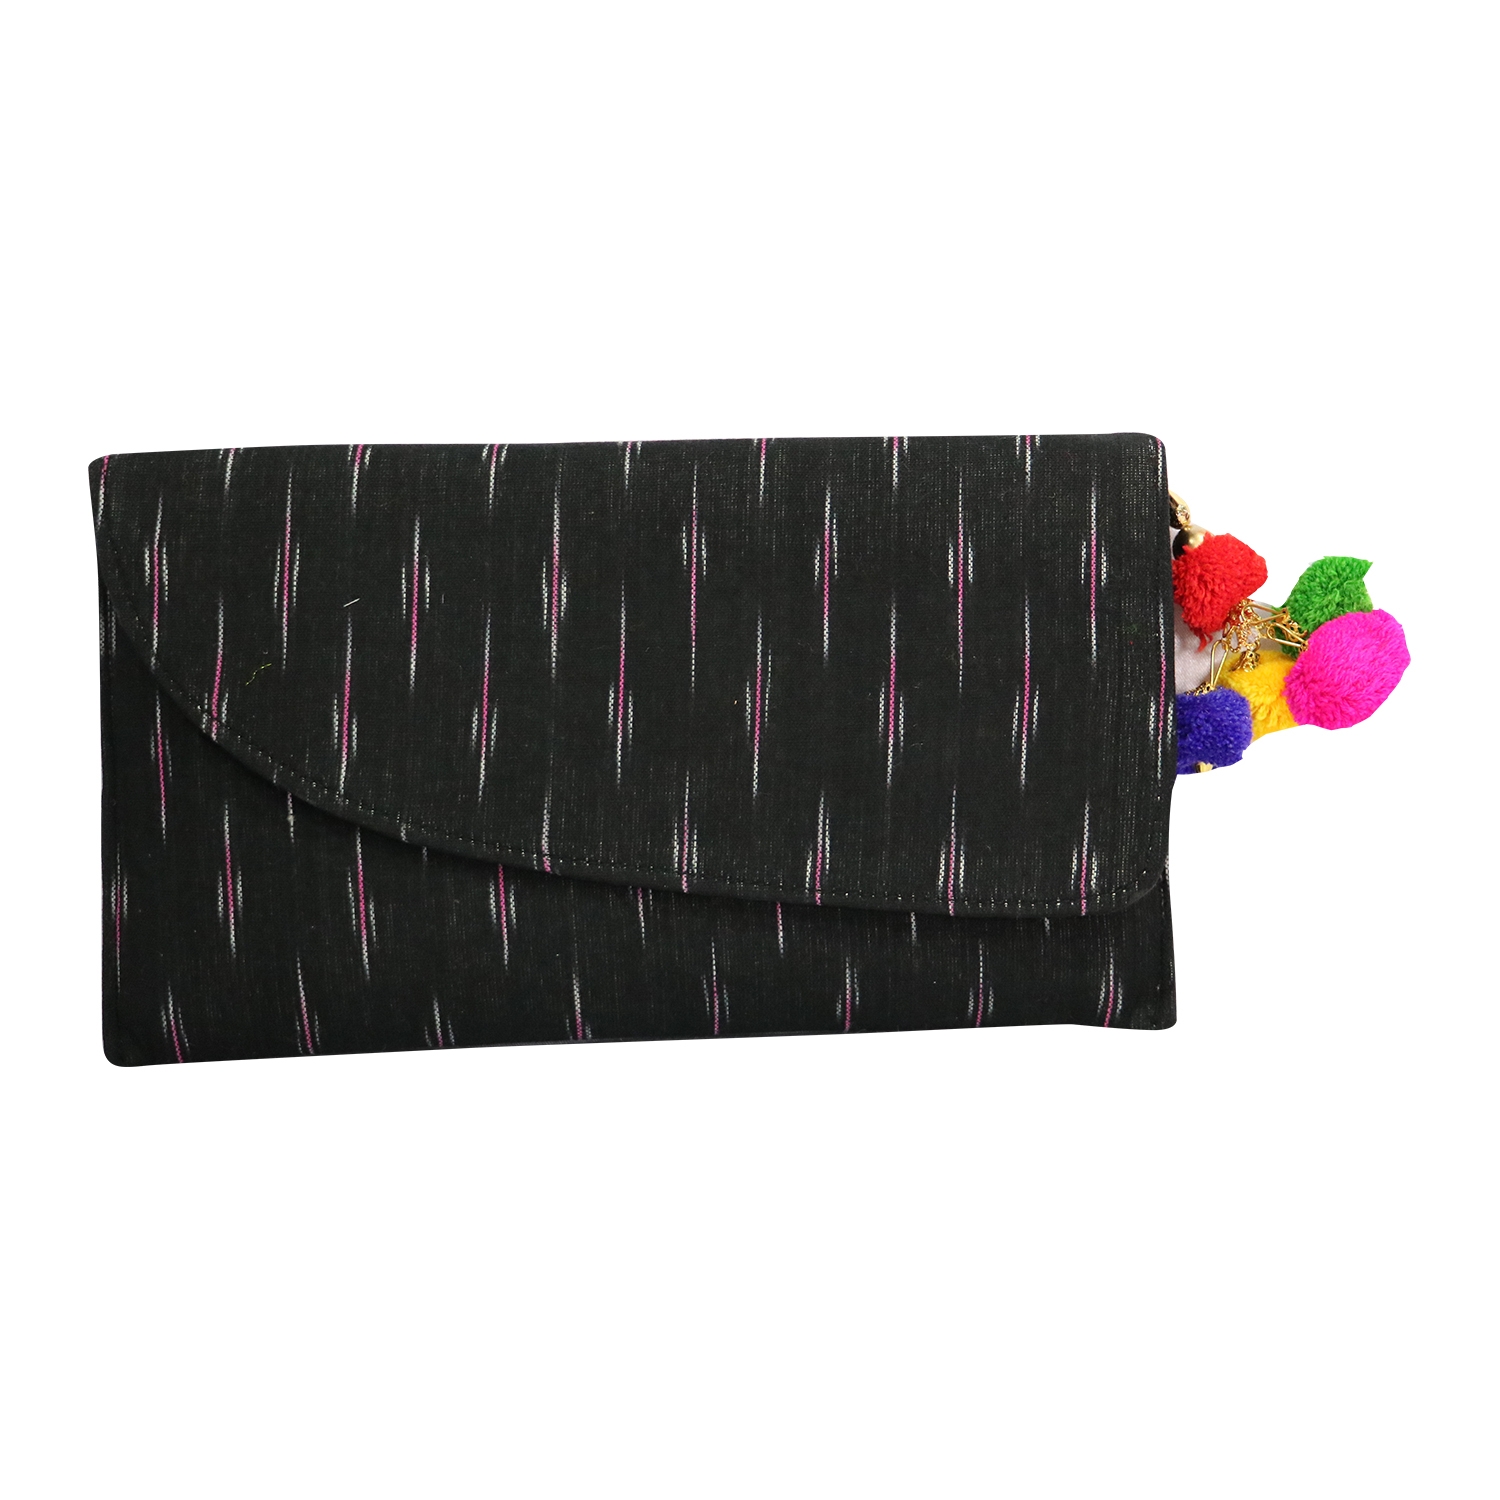 EMM | Lely's Cotton Stylish Printed Clutch